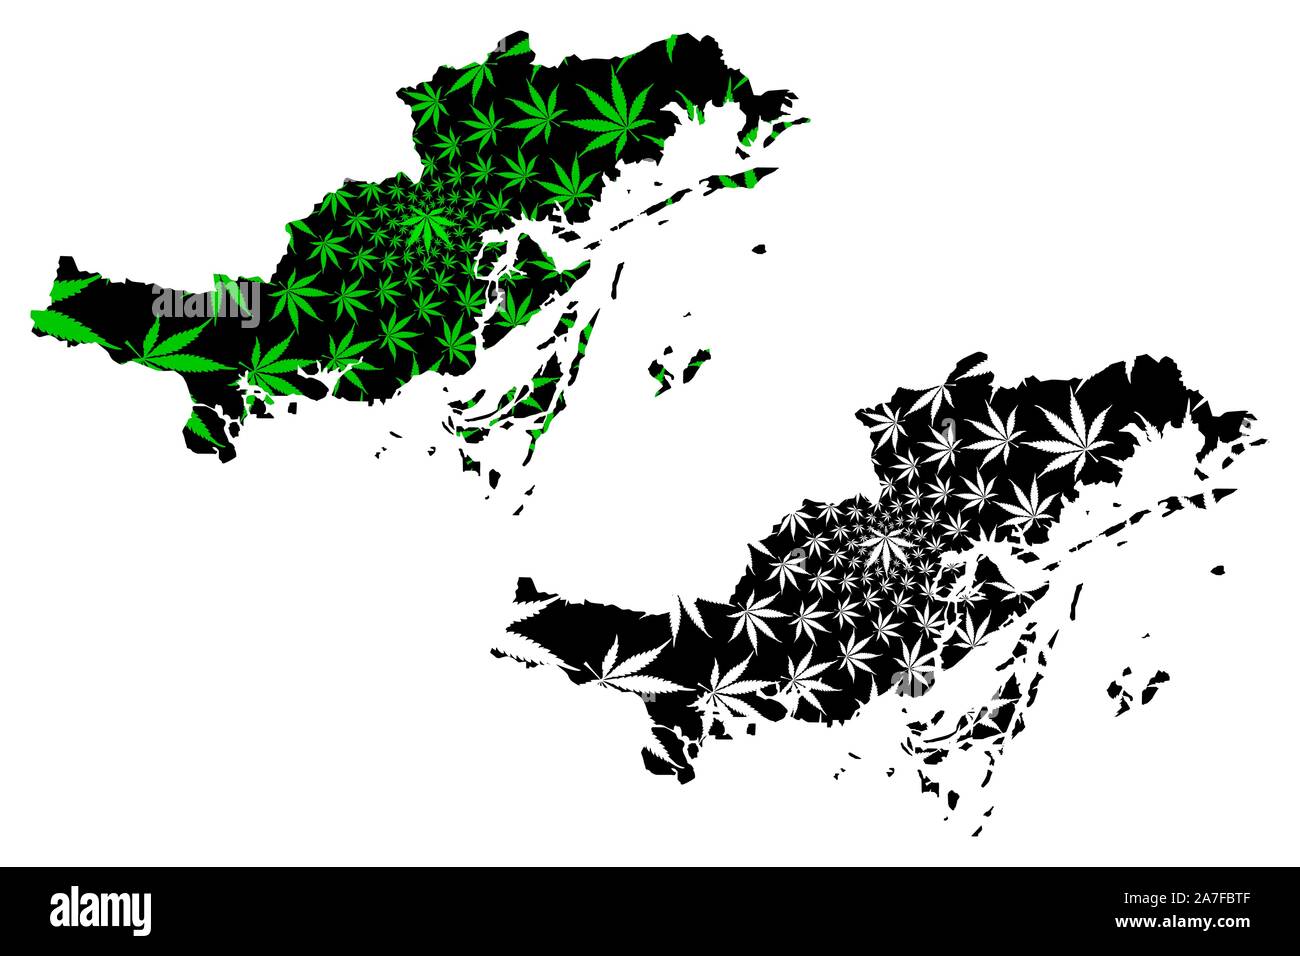 Quang Ninh Province (Socialist Republic of Vietnam, Subdivisions of Vietnam) map is designed cannabis leaf green and black, Tinh Quang Ninh map made o Stock Vector